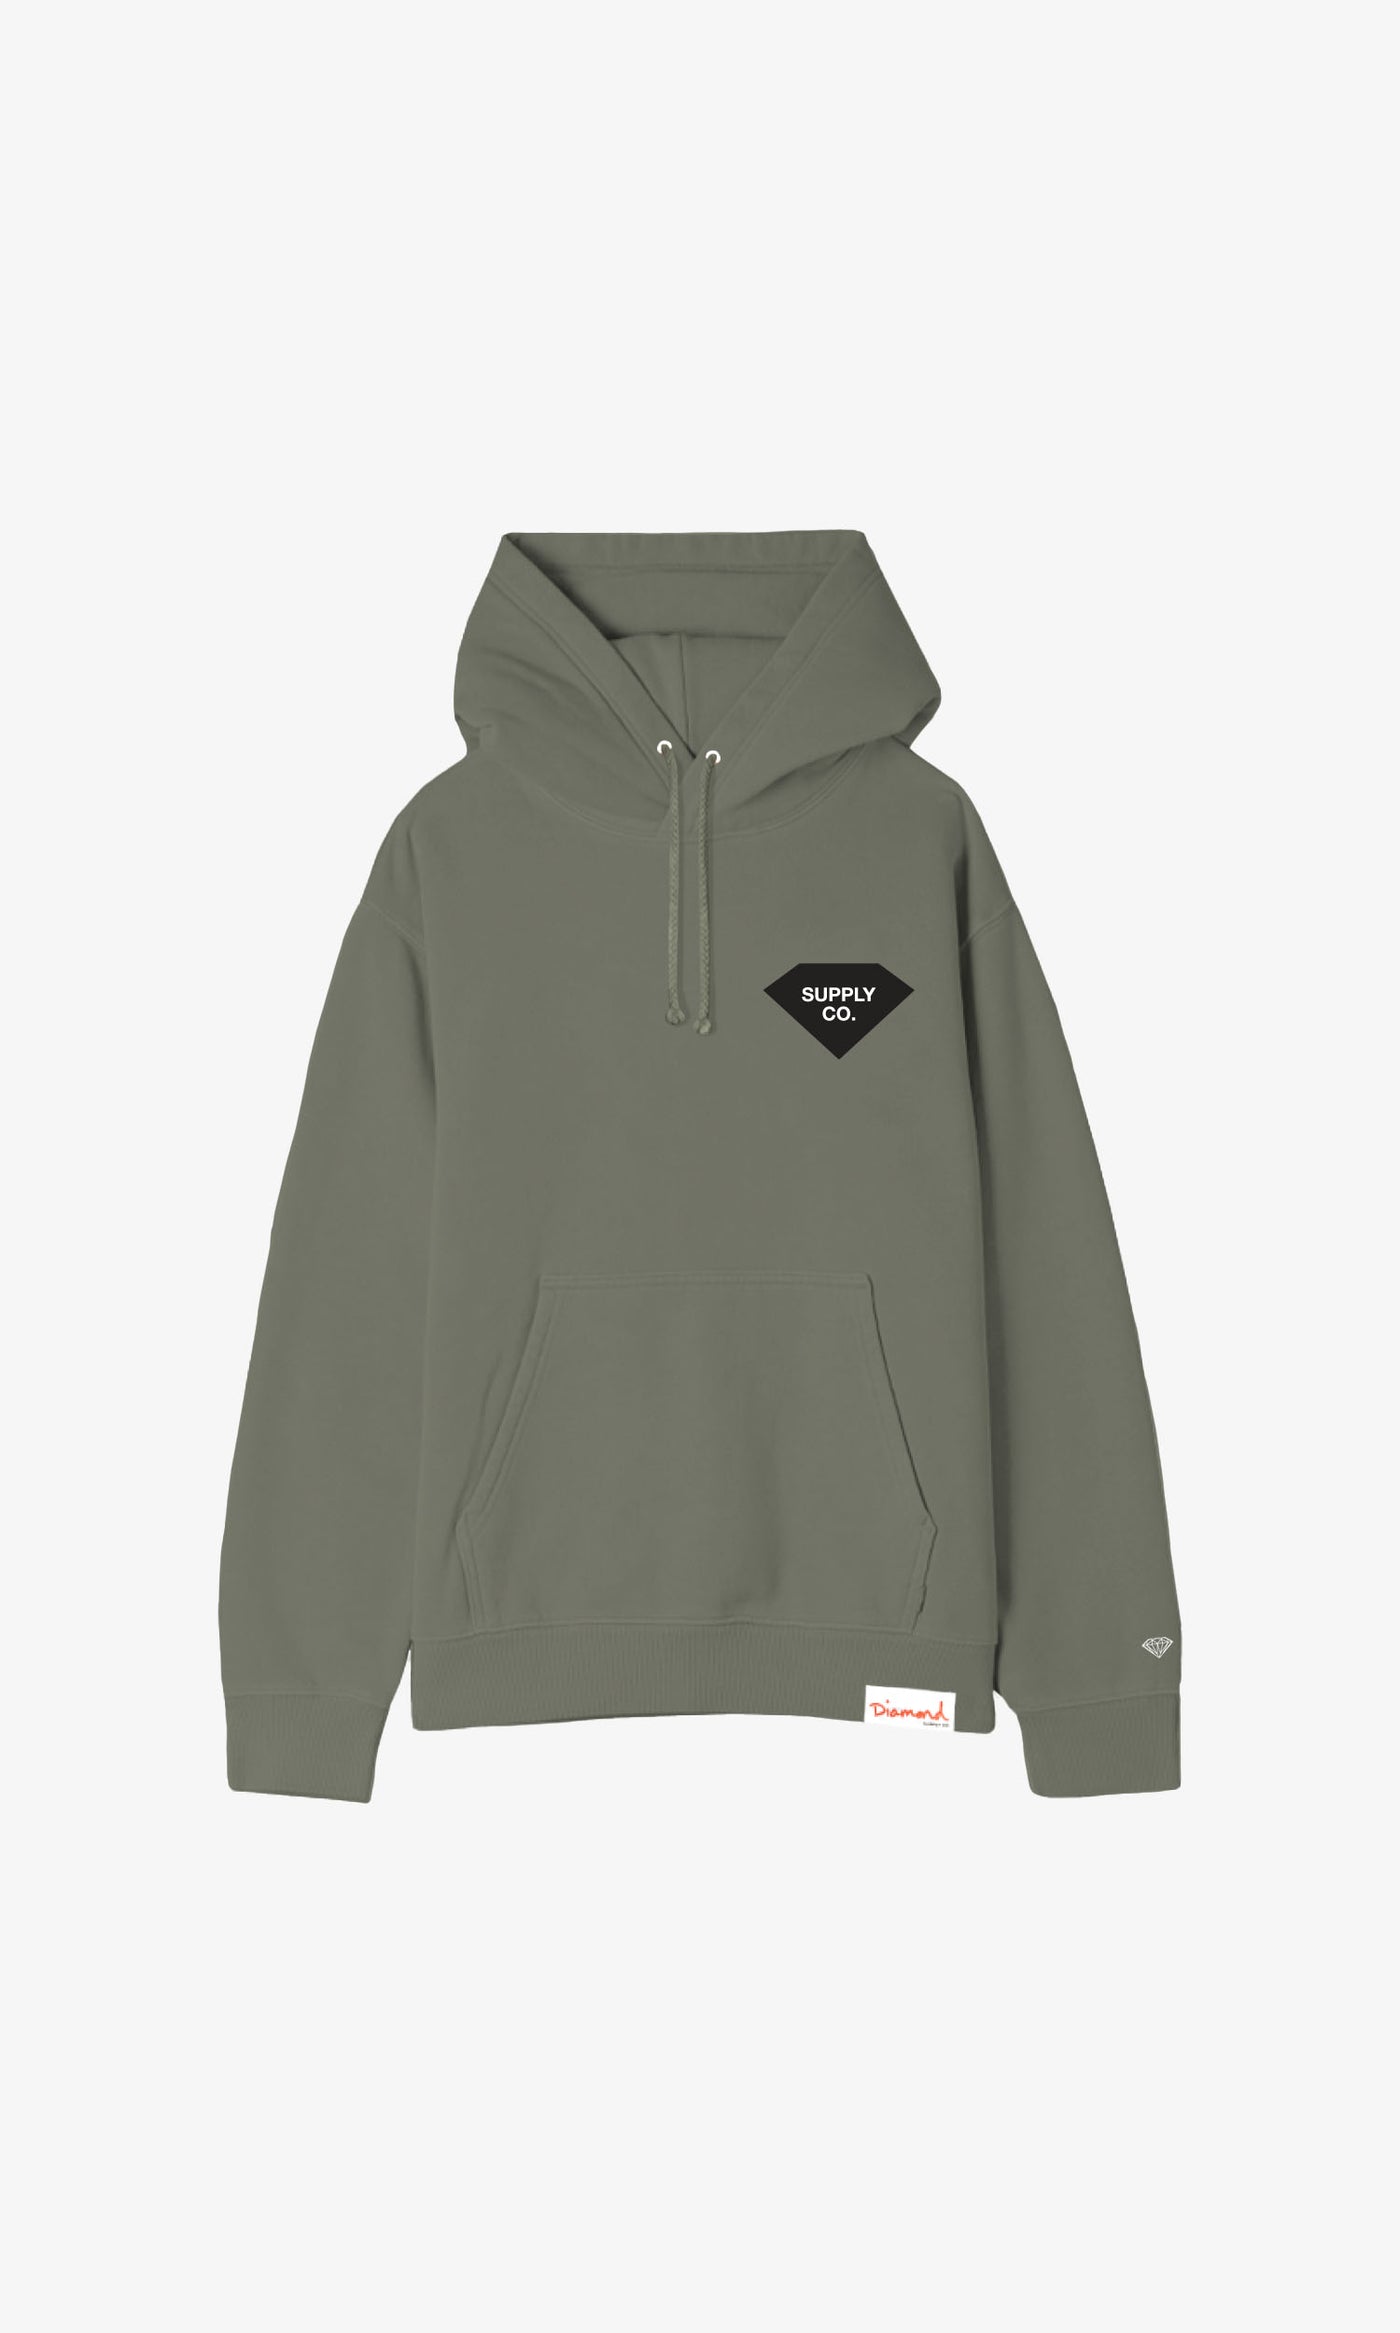 SILHOUETTE SUPPLY CO HOODIE - ARMY